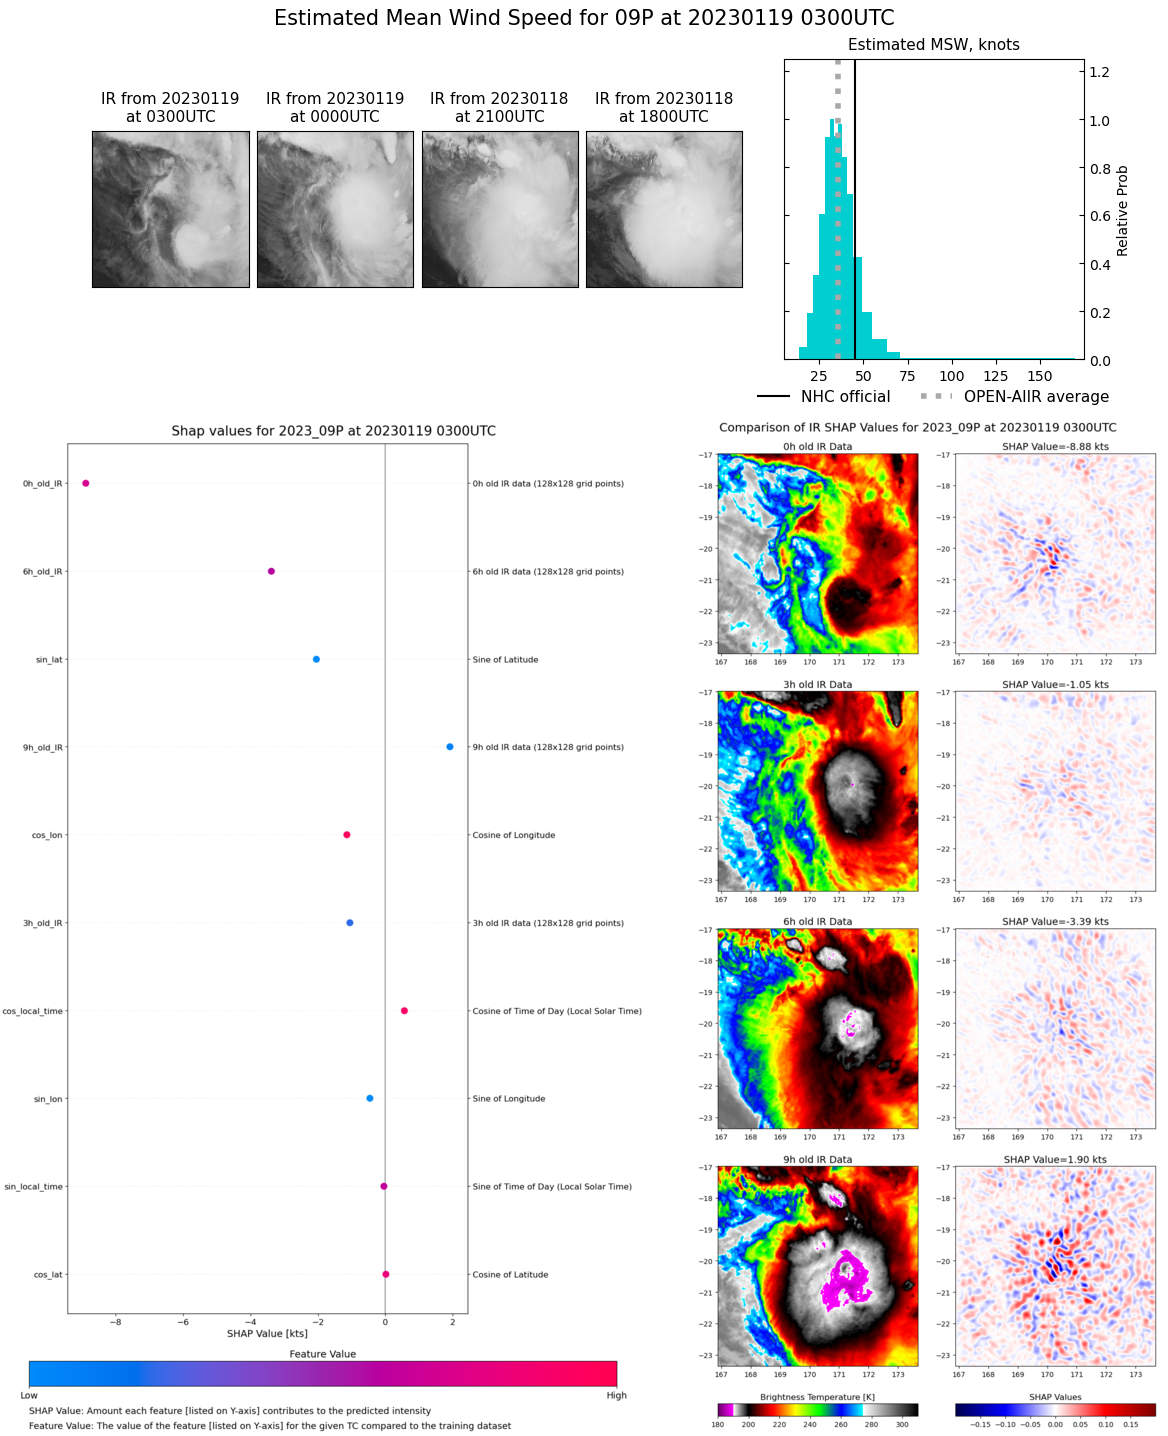 SATELLITE ANALYSIS, INITIAL POSITION AND INTENSITY DISCUSSION: ANIMATED MULTISPECTRAL SATELLITE IMAGERY (MSI) DEPICTS AN EXPOSED, BROAD LOW-LEVEL CIRCULATION (LLC) WITH DEEP CONVECTION SHEARED TO THE SOUTHEAST. AN 182136Z MHS 89GHZ MICROWAVE IMAGE INDICATES A CLUSTER OF INTENSE CONVECTION SHEARED TO THE EAST OF AN EXPOSED, WEAKLY DEFINED LLC. AN 182231Z ASCAT-C IMAGE REVEALS AN ELONGATED CIRCULATION WITH 40-45 KNOT WINDS OVER THE EASTERN AND SOUTHERN QUADRANTS. THE INITIAL POSITION IS PLACED WITH MEDIUM CONFIDENCE BASED ON THIS ASCAT-C IMAGE. THE INITIAL INTENSITY OF 45 KTS IS ASSESSED WITH HIGH CONFIDENCE BASED ON THE ASCAT DATA. RECENT SURFACE OBSERVATIONS FROM WHITEGRASS AIRPORT ON THE ISLAND OF TANNA INDICATE SOUTHERLY WINDS AT 10 KNOTS WITH SLP NEAR 996MB. BASED ON THE WIND SHIFT AT WHITEGRASS AIRPORT OVER THE PAST FEW HOURS, THE  SYSTEM CENTER IS PASSING DIRECTLY OVER THE ISLAND.